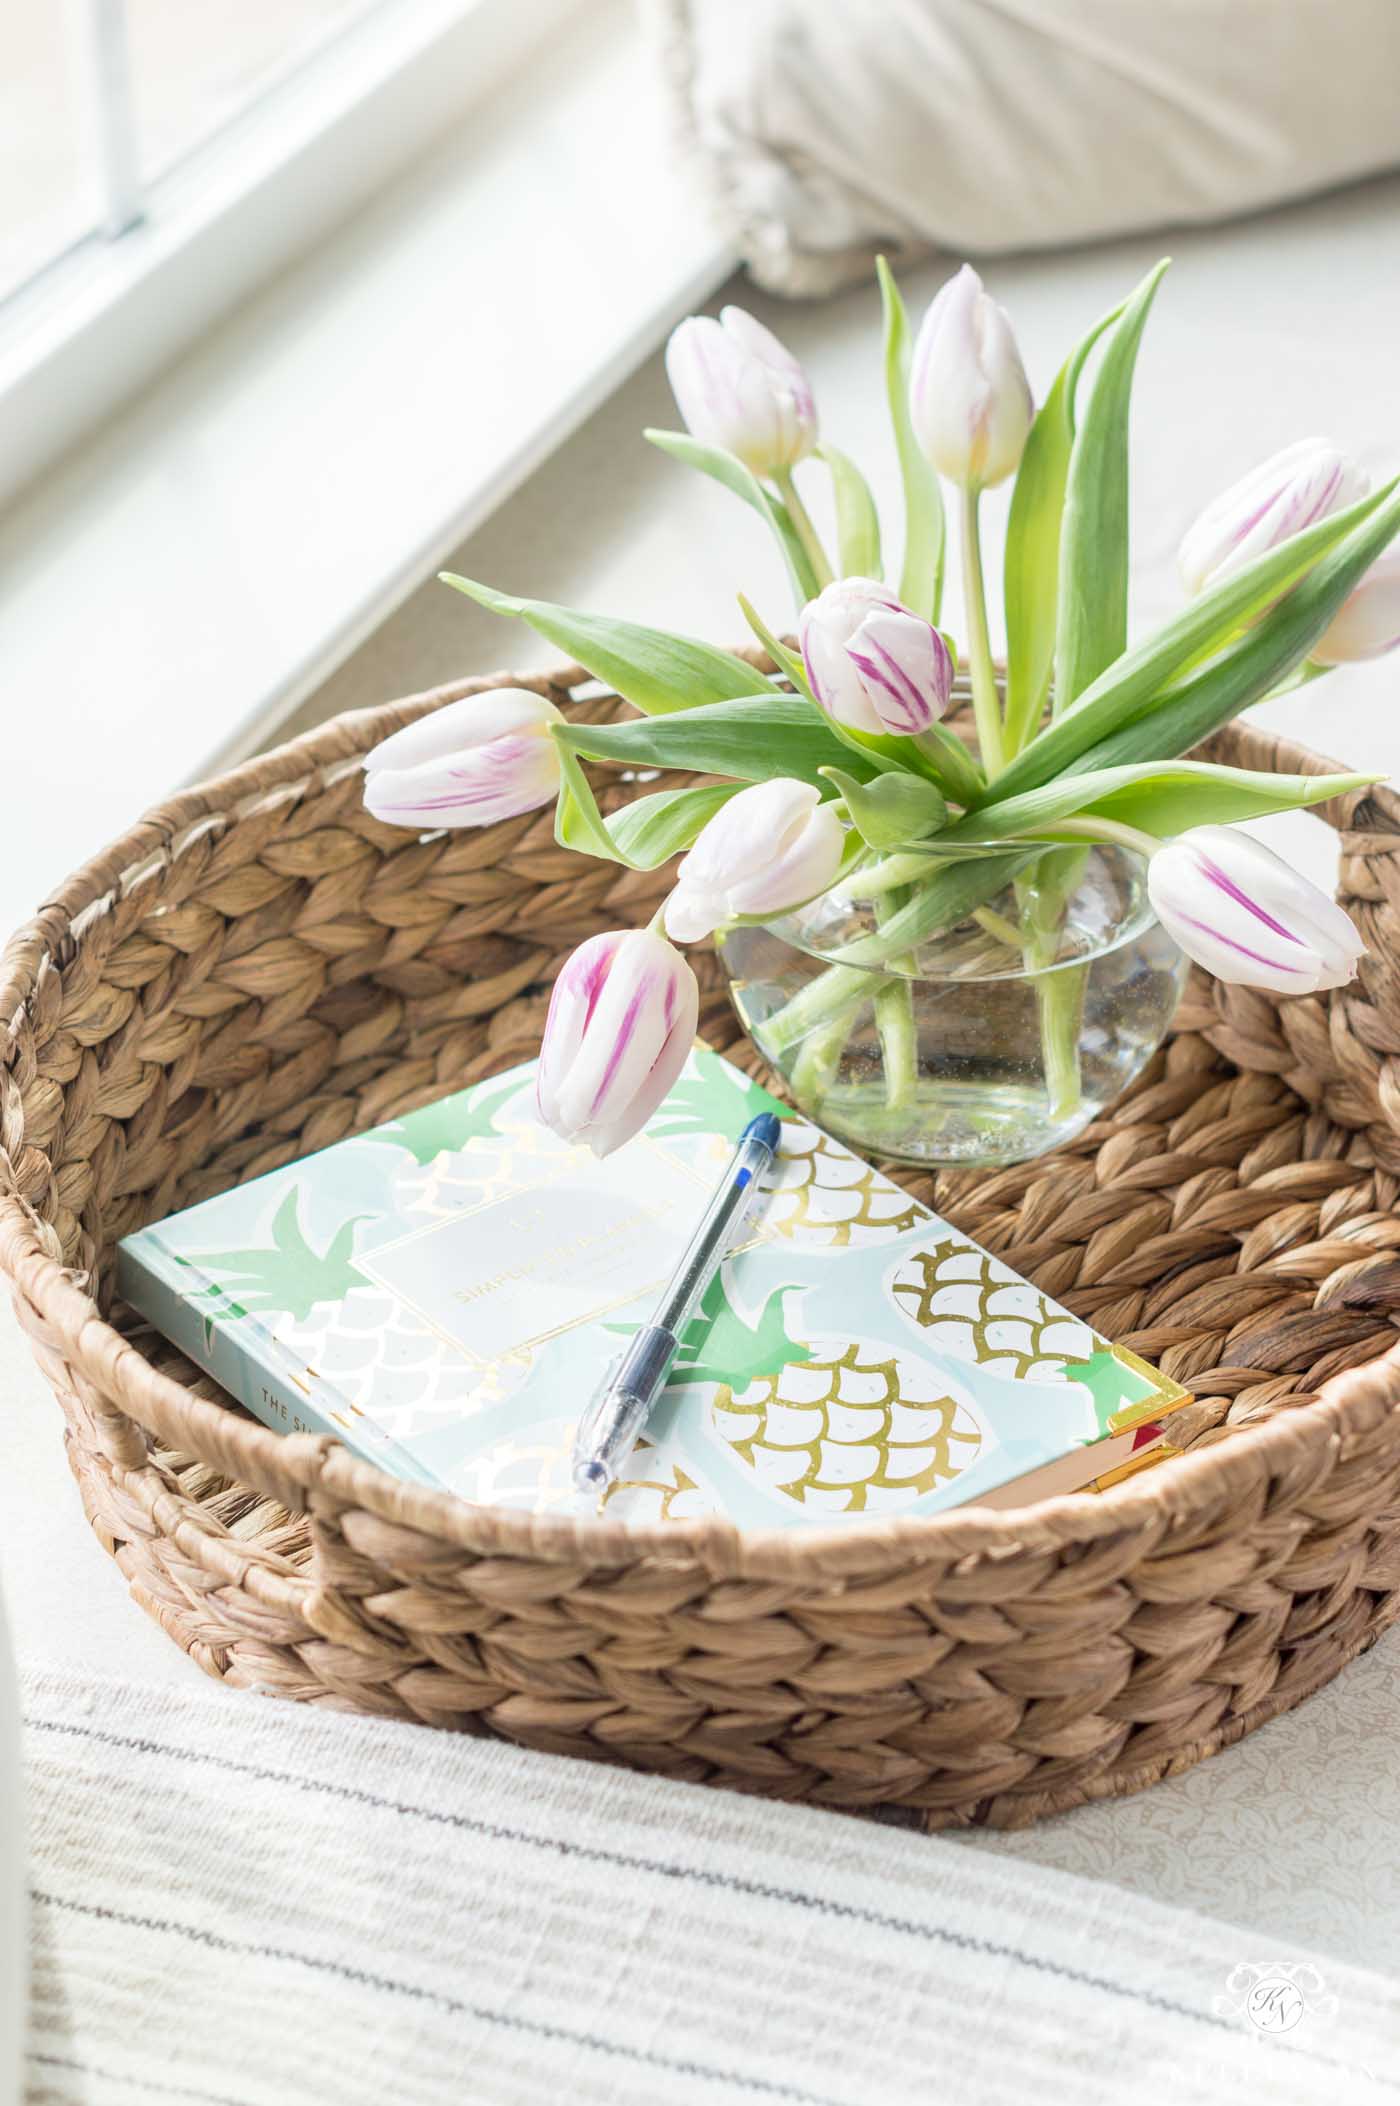 5 Ways To Bring Spring To Your Desk Office And Work Space